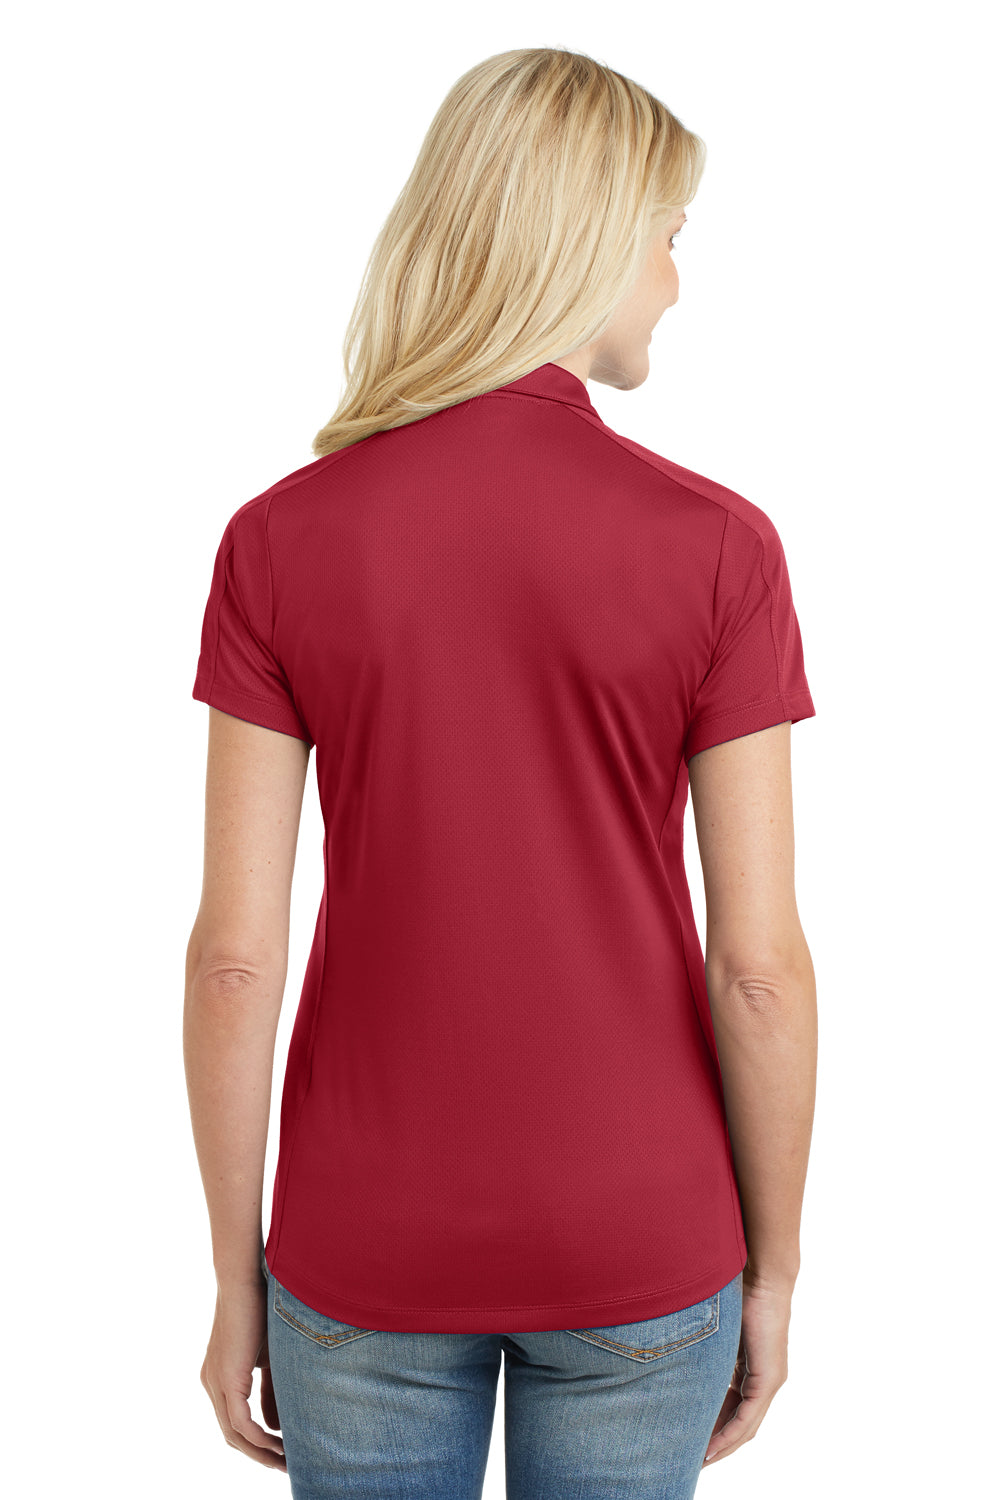 Port Authority L569 Womens Moisture Wicking Short Sleeve Polo Shirt Red Back